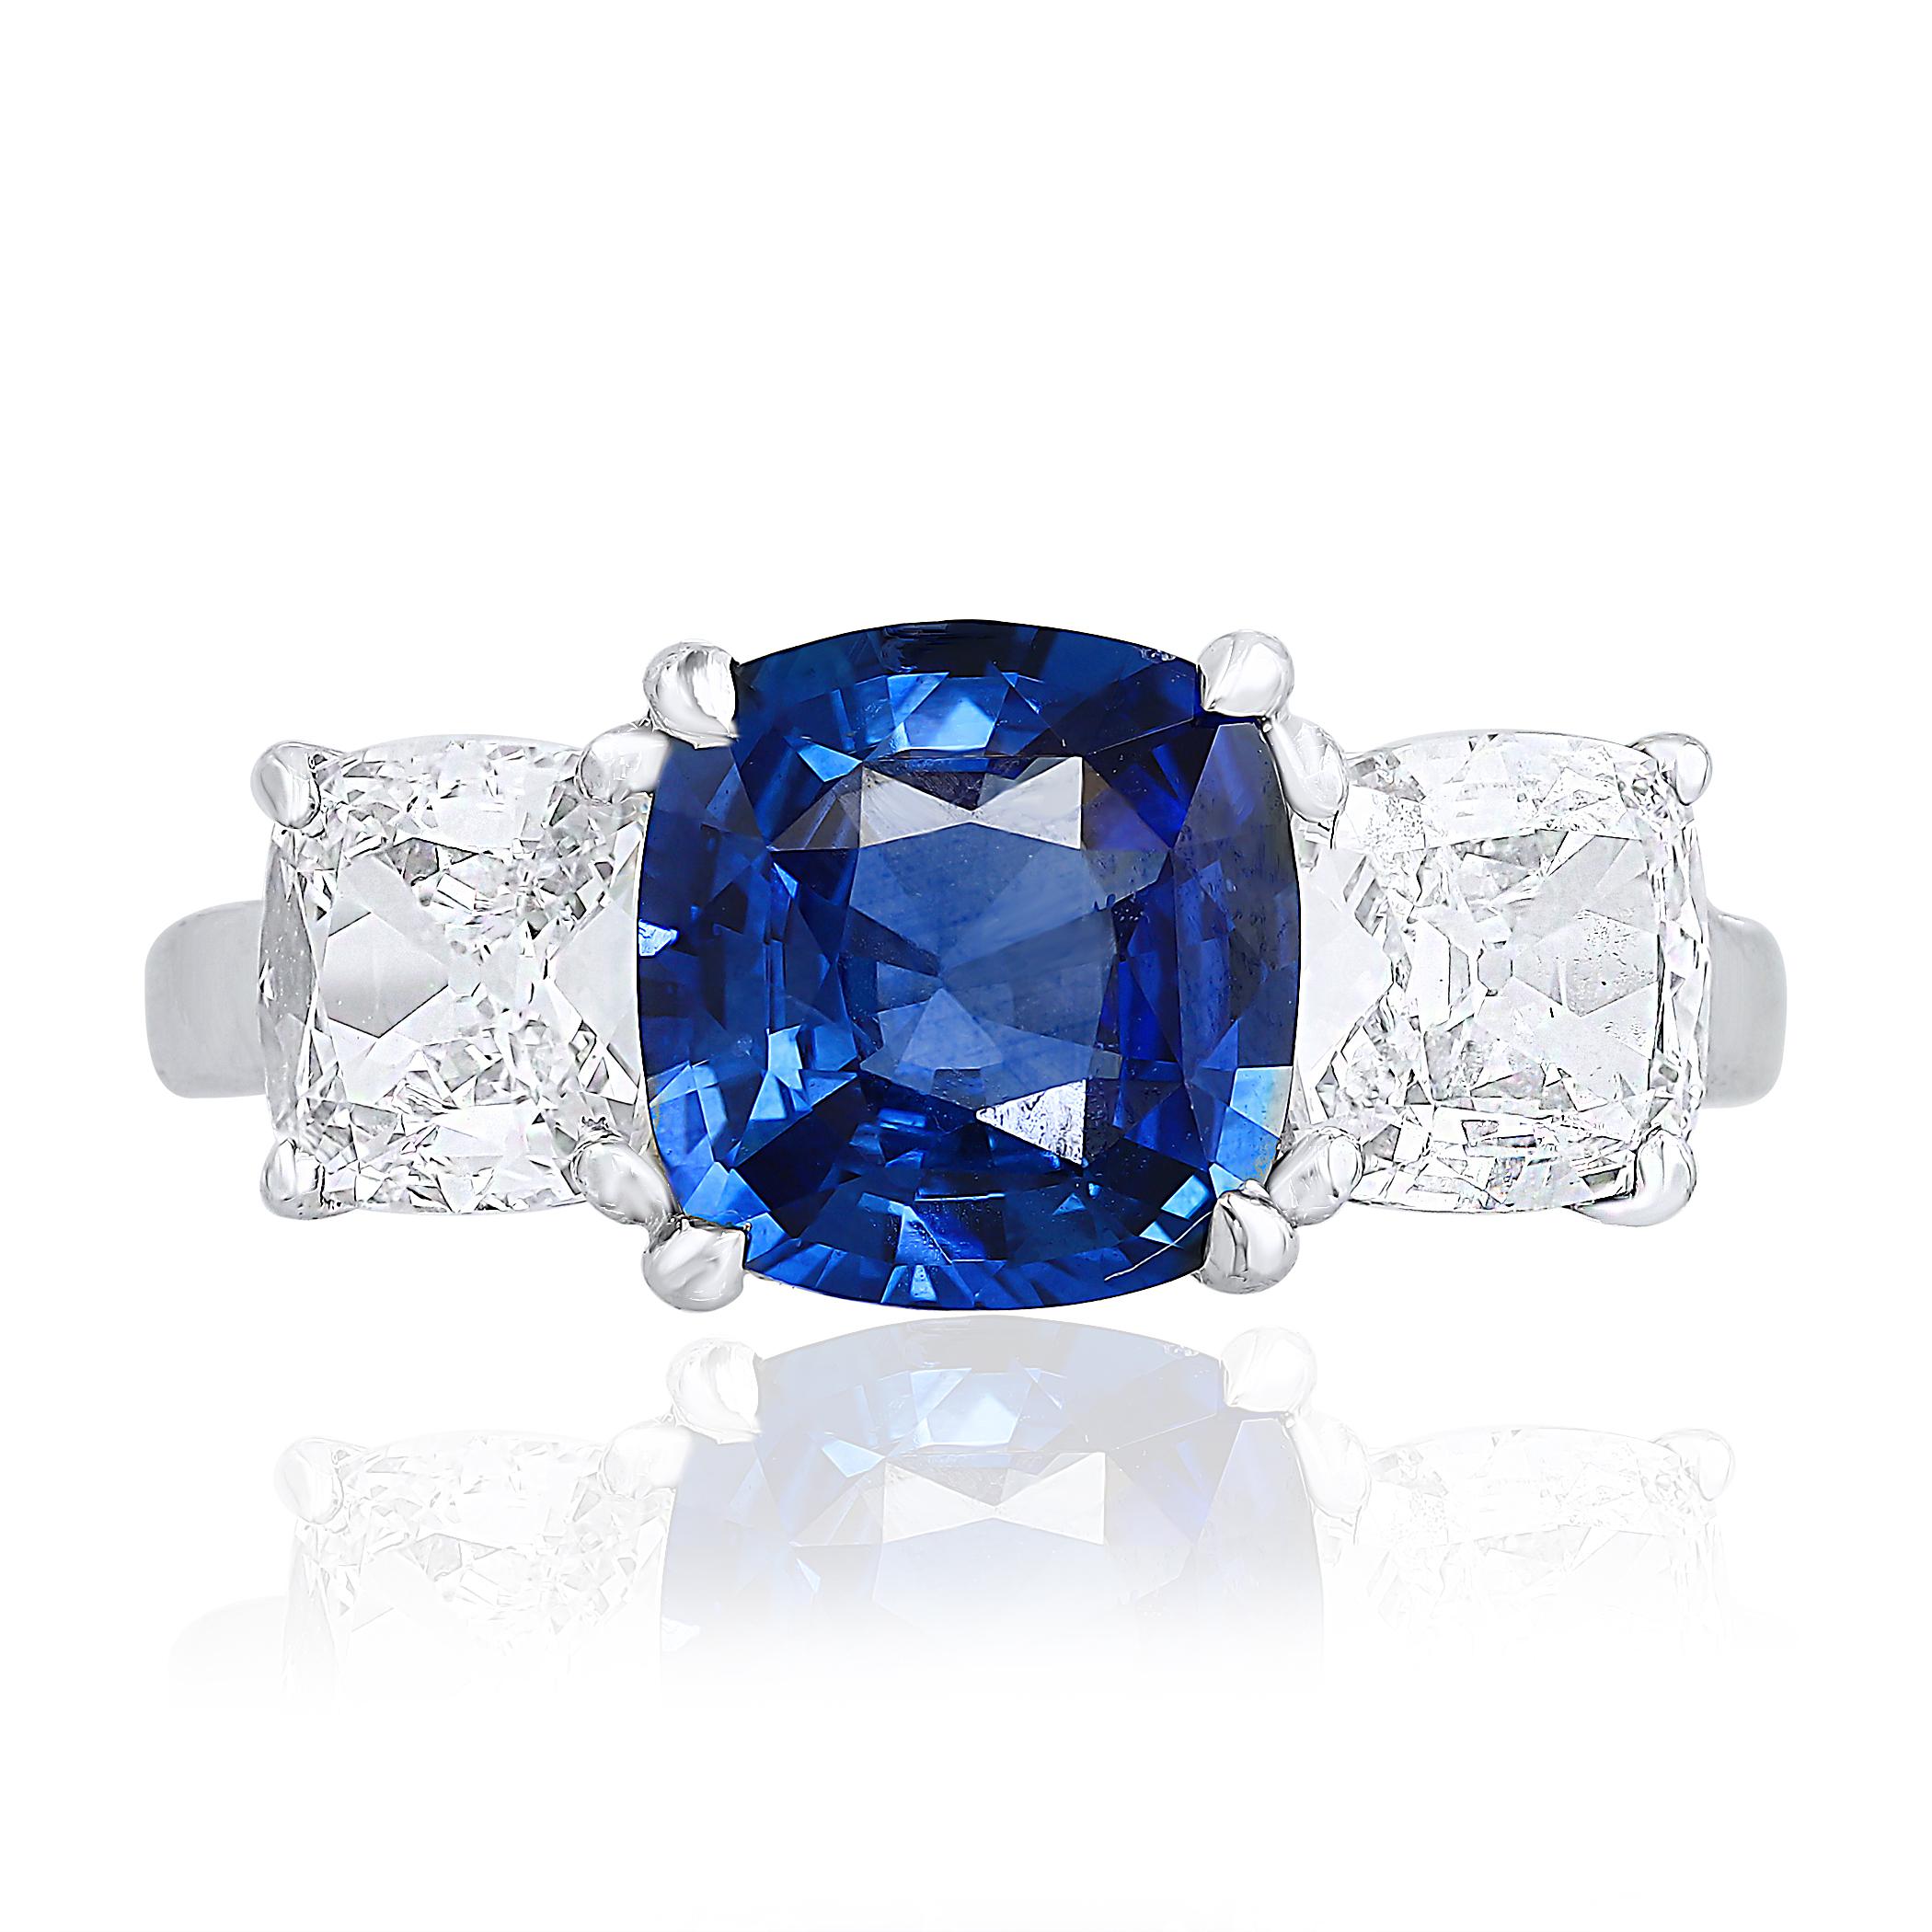 Showcasing a rare vibrant Cushion Cut Blue Sapphire weighing 2.14 carats and Flanking the center gemstone are two square brilliant diamonds weighing 1.40 carats total. Set in a polished platinum mounting.

Style available in different price ranges.